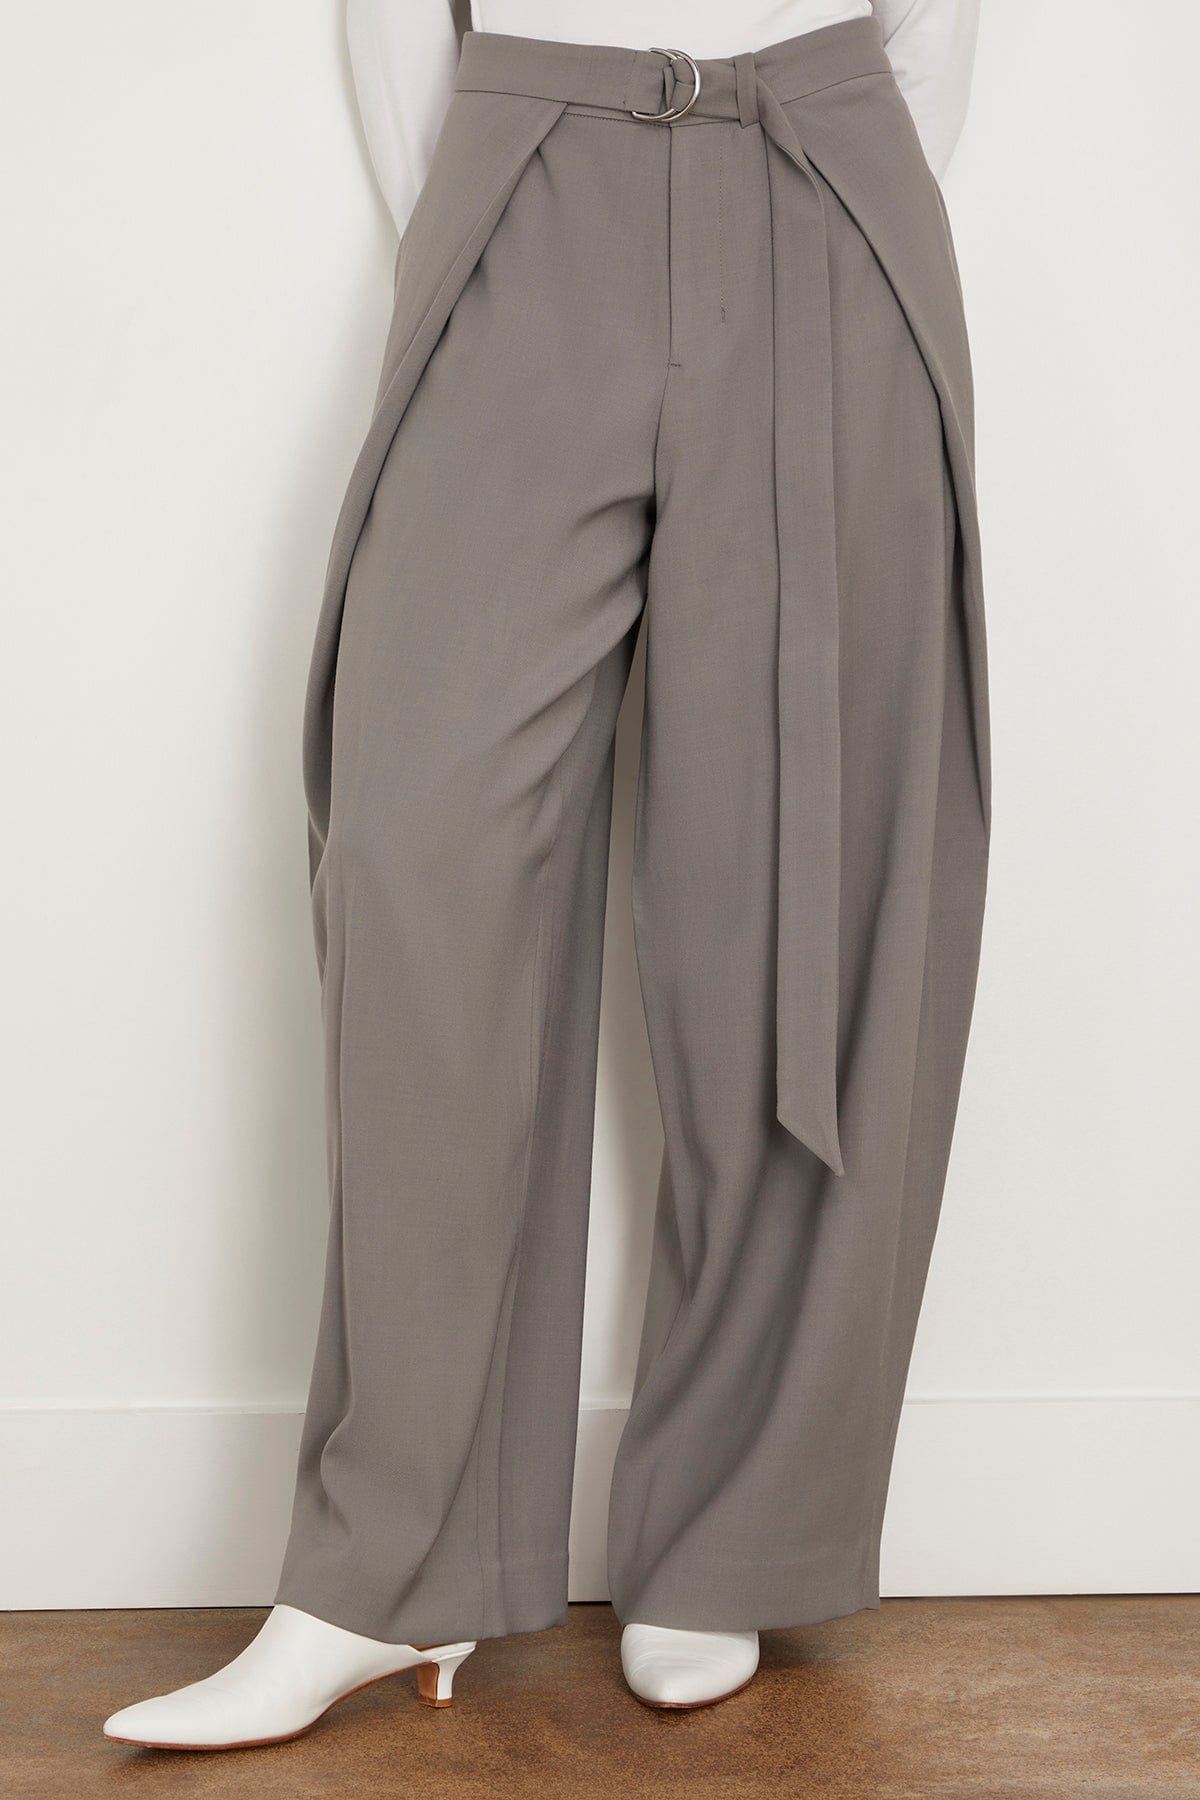 Ami Paris Pants Wide Fit Trousers with Floating Panels in Mineral Grey